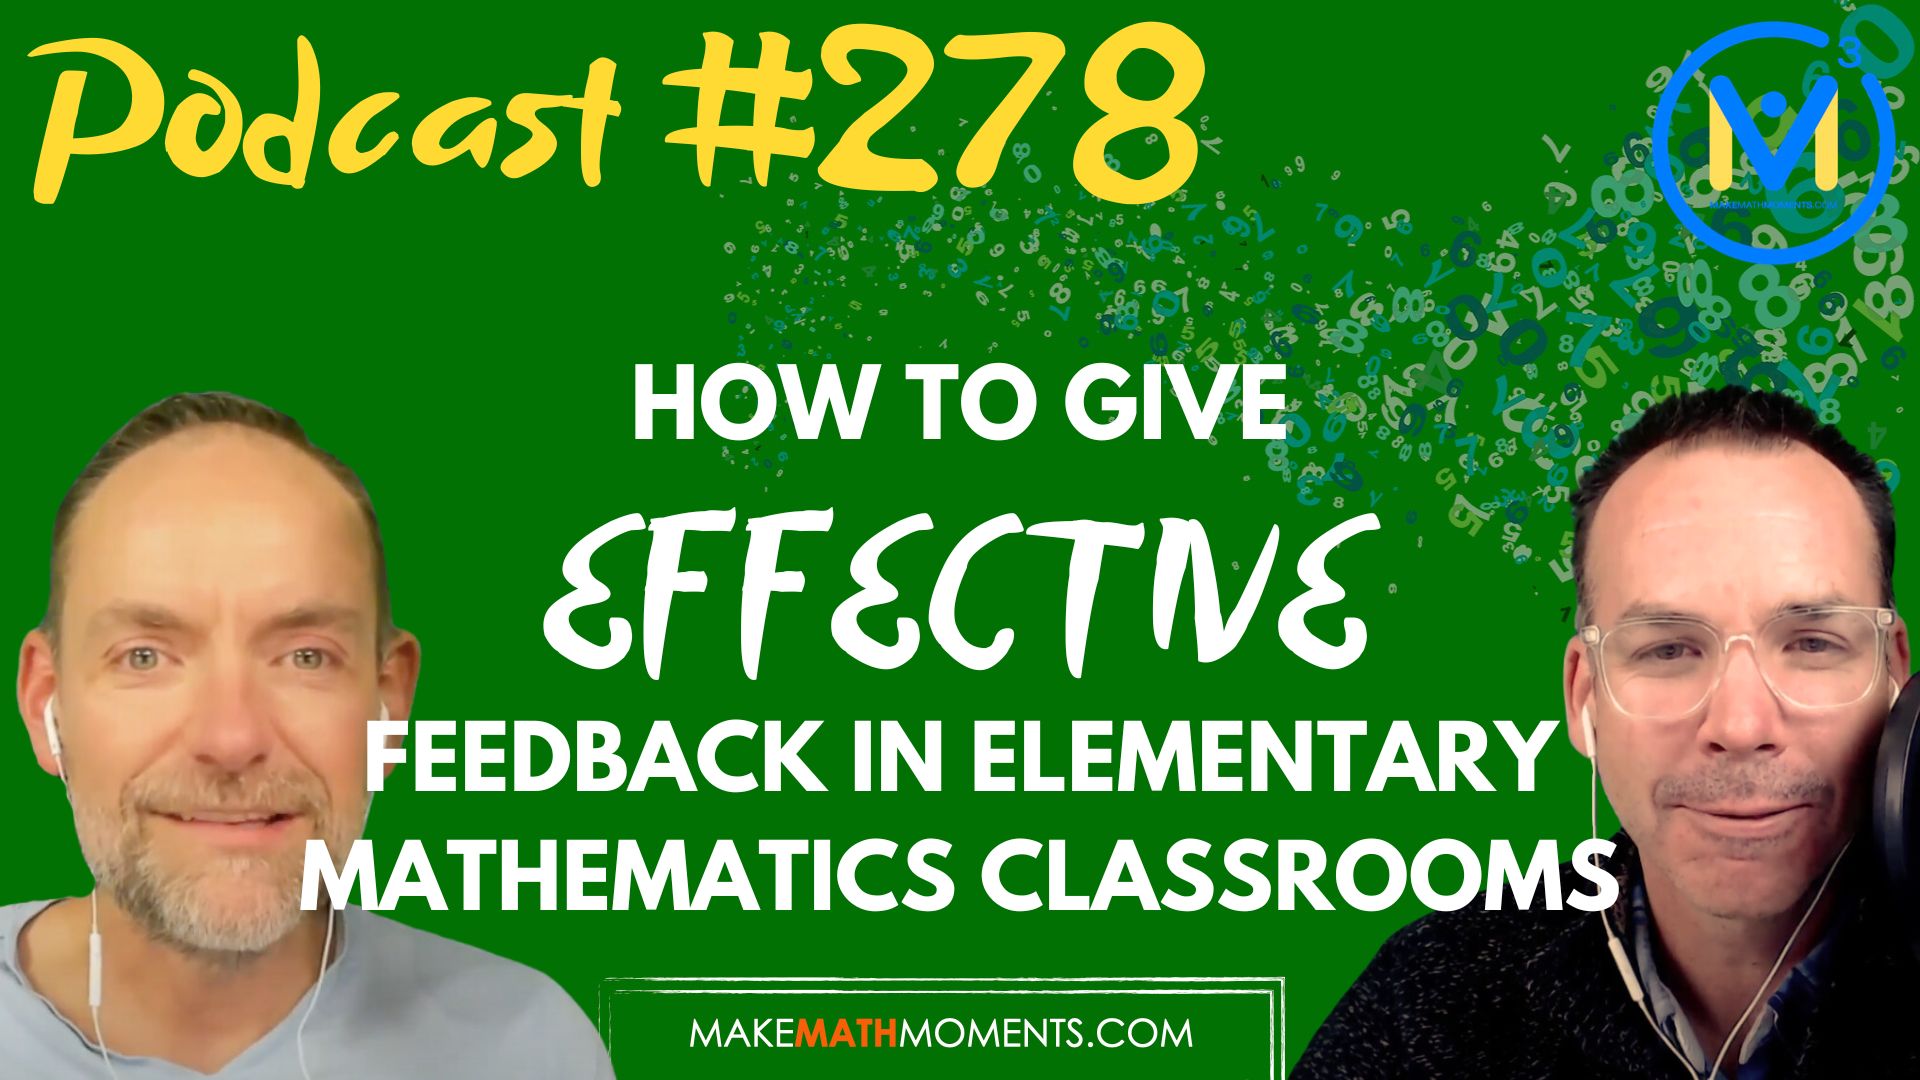 Episode #278: How To Give Effective Feedback In Elementary Mathematics Classrooms – A Math Mentoring Moment